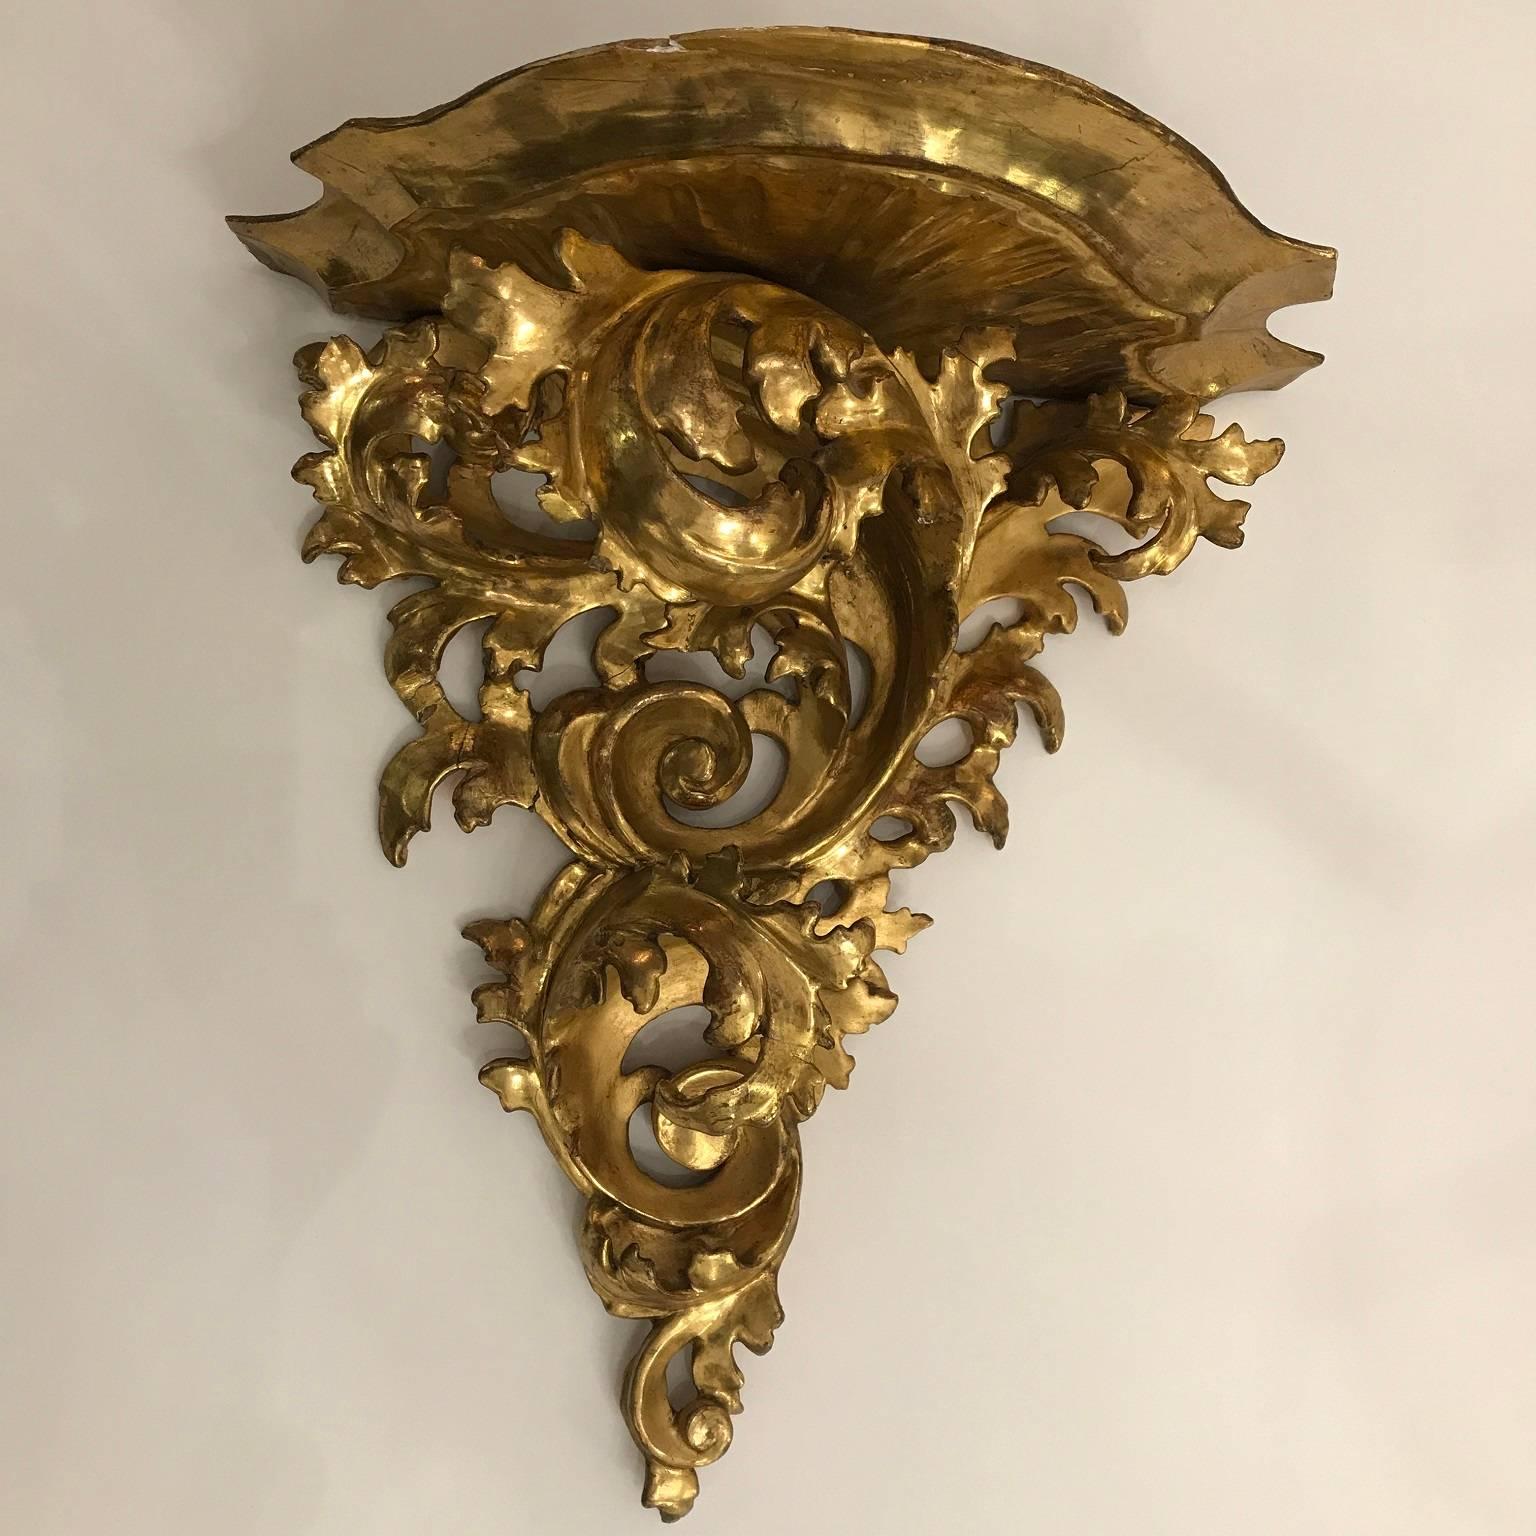 Hand-Carved Pair of 19th Century Italian Giltwood Wall Brackets